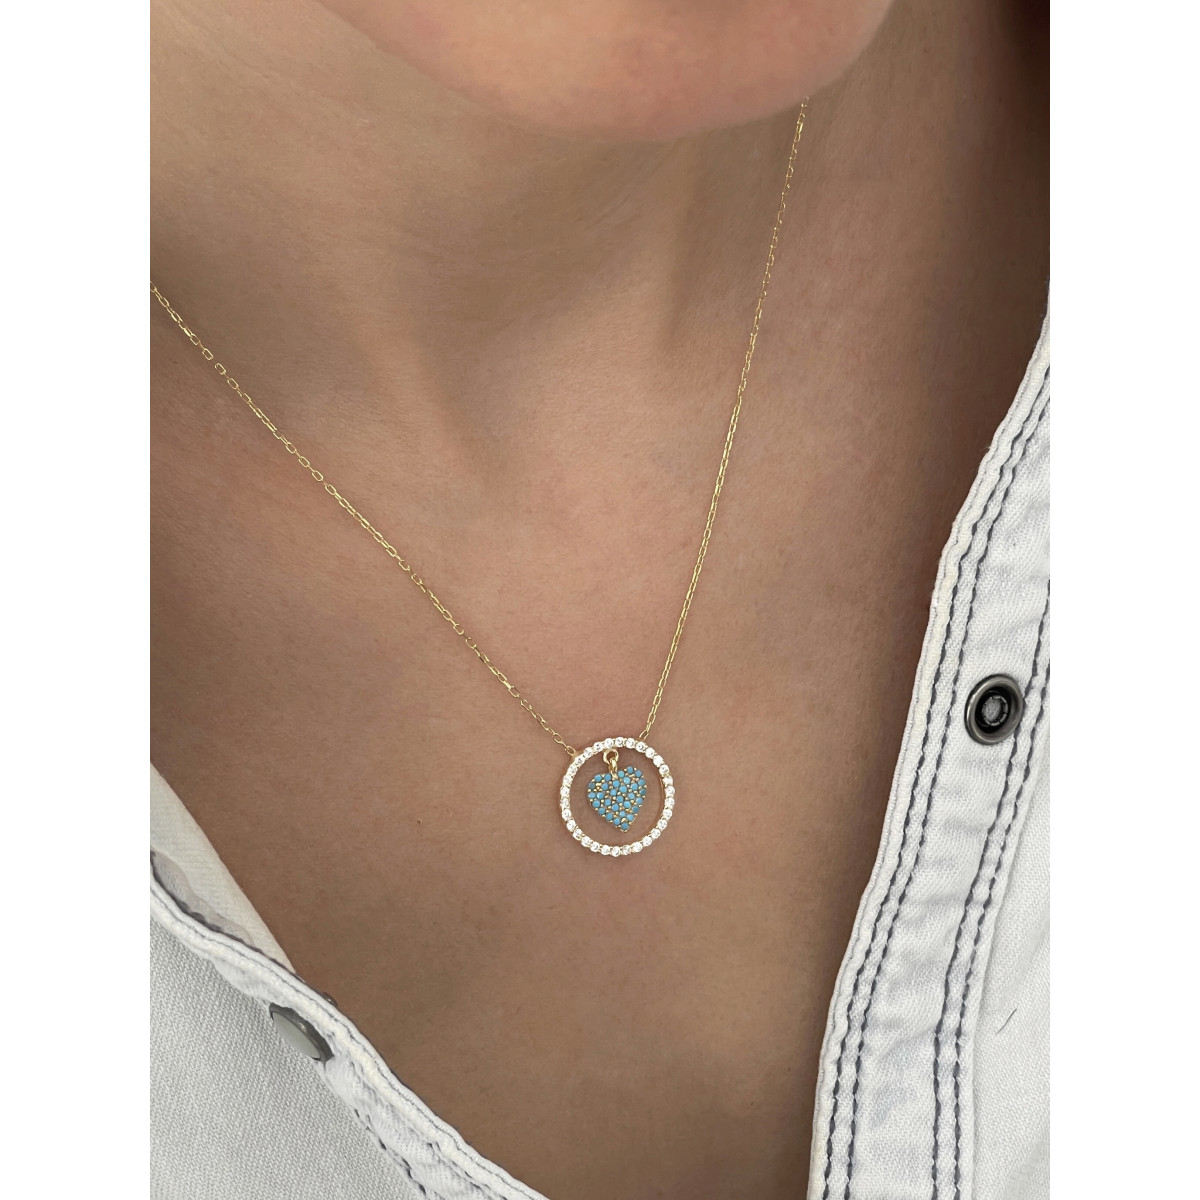 WHITE HOOP WITH TURQUOISE INNER HEART PENDANT NECKLACE